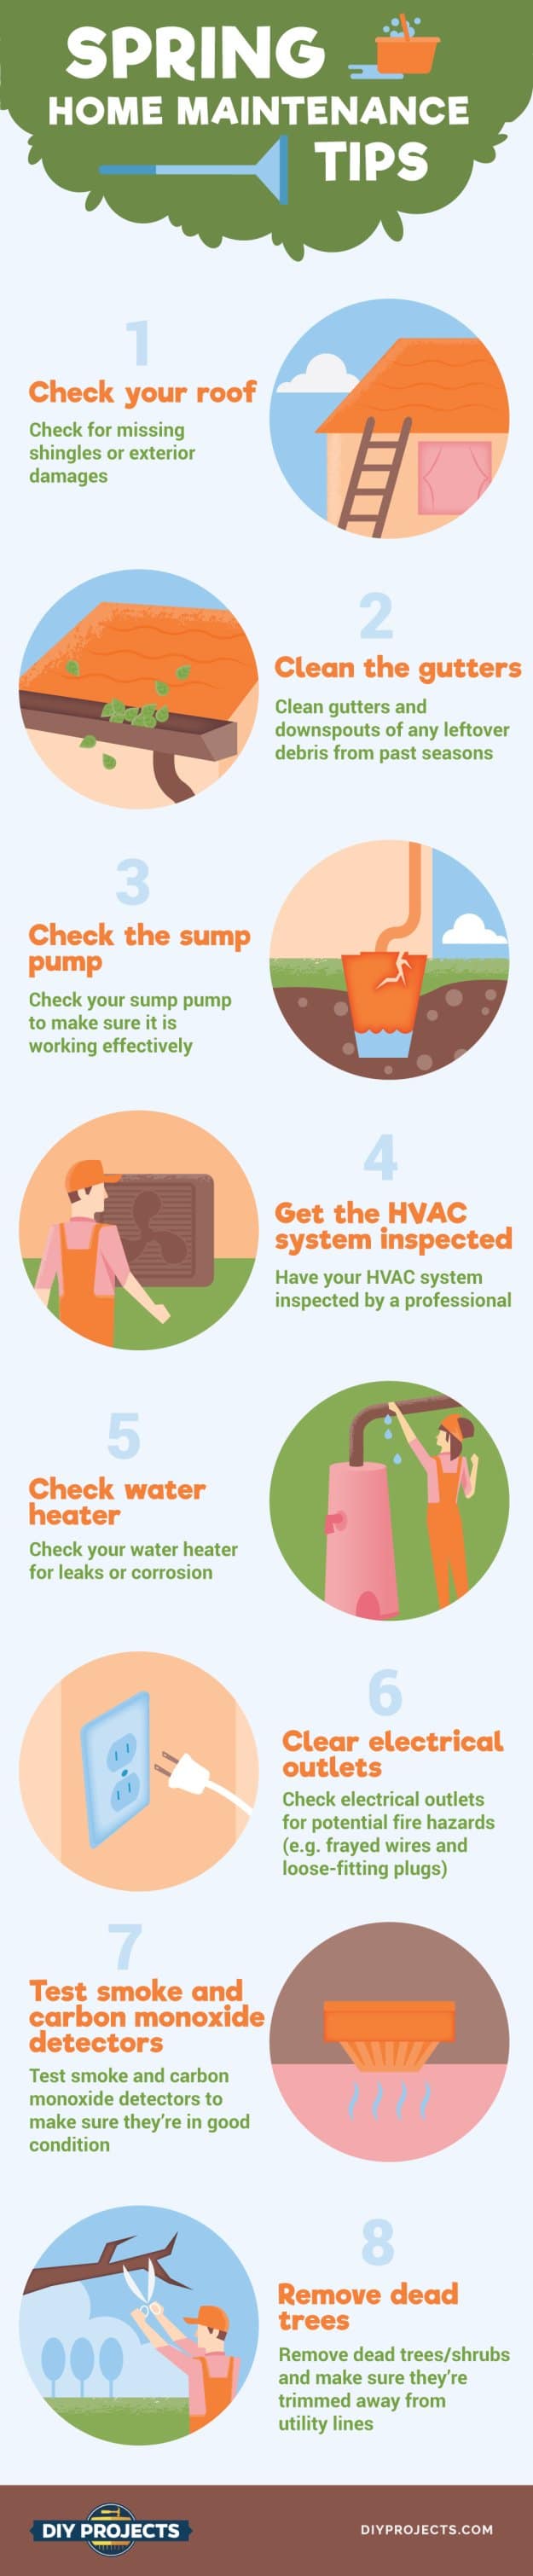 Spring Home Maintenance Tips [Infographic]